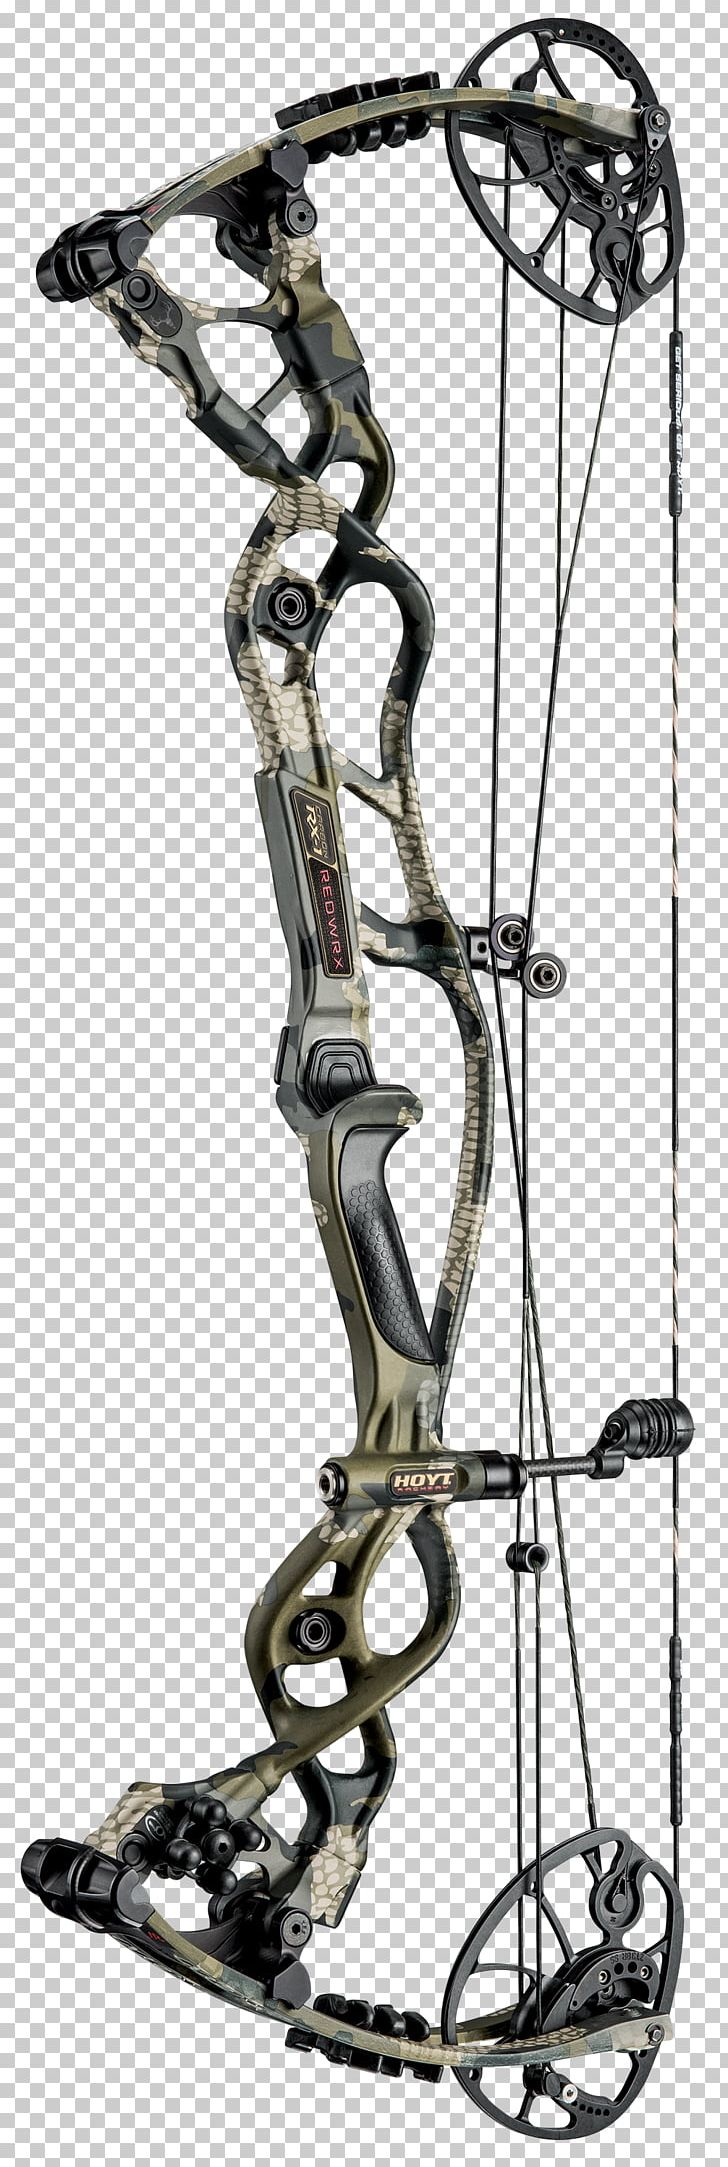 Bow And Arrow Compound Bows Hoyt Archery PNG, Clipart, Archery, Arrow, Benson Archery, Bow, Bow And Arrow Free PNG Download